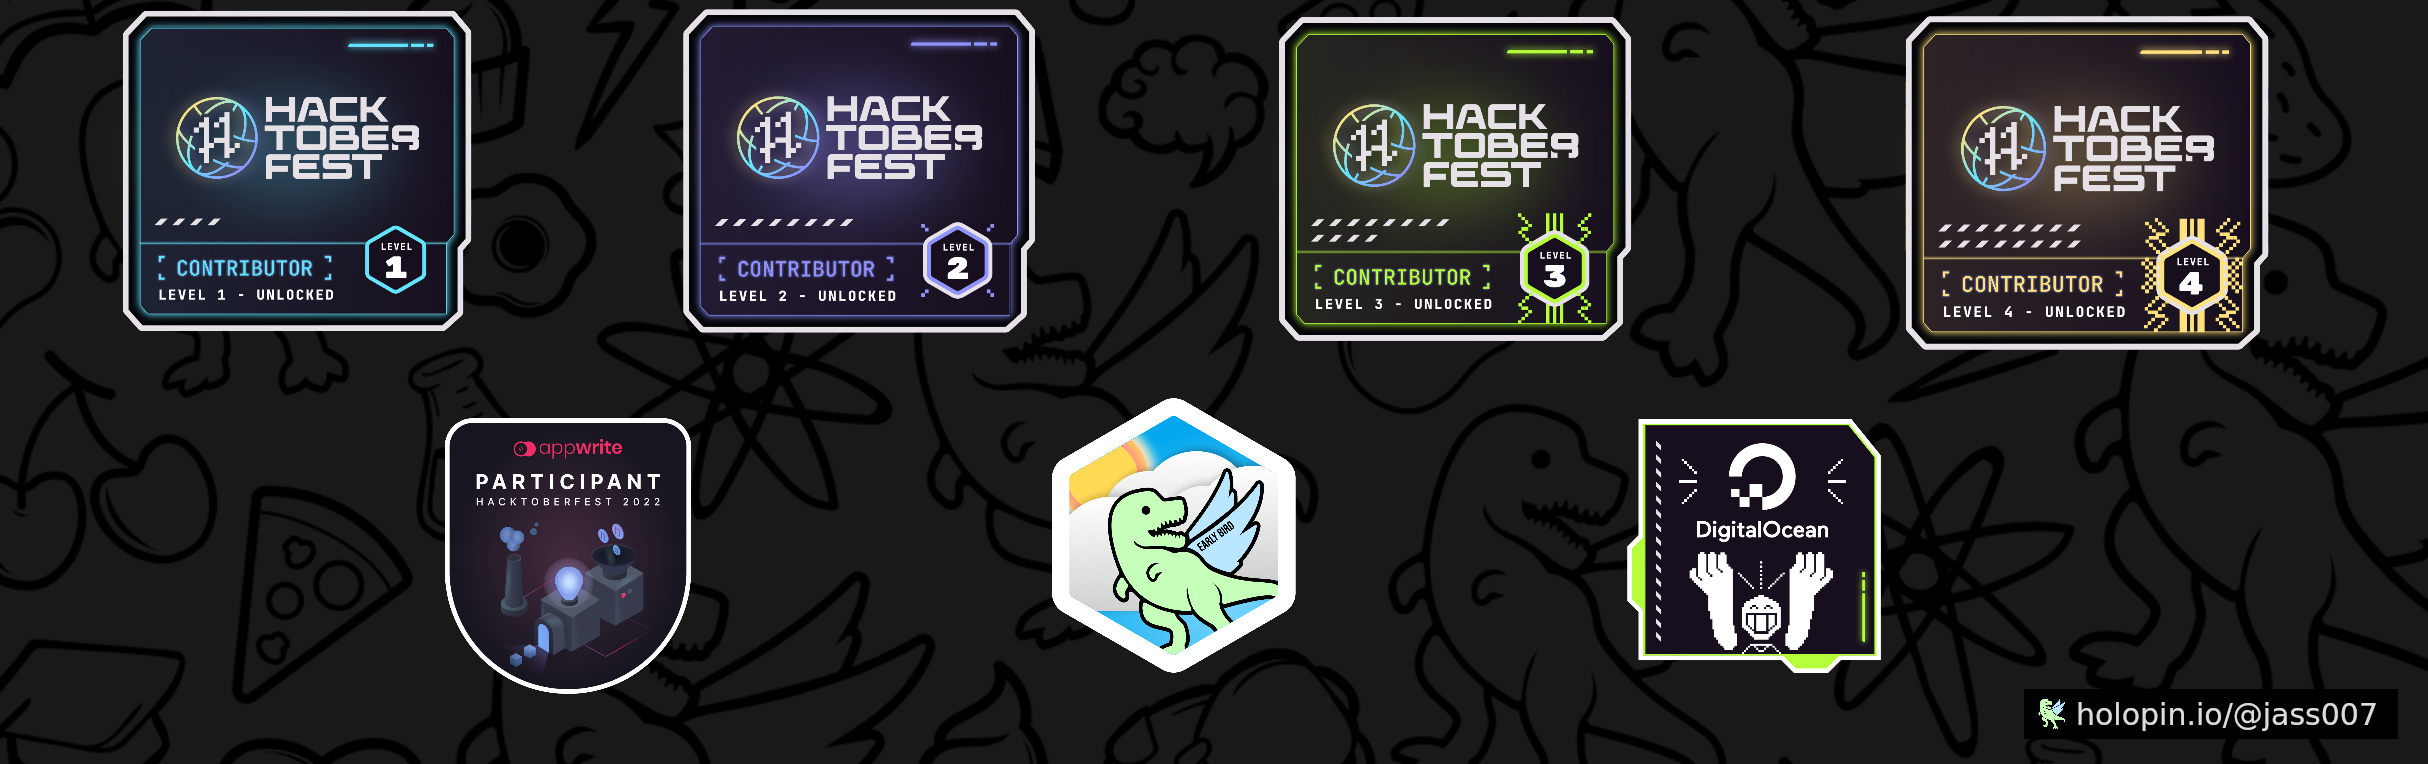 An image of @jass007's Holopin badges, which is a link to view their full Holopin profile